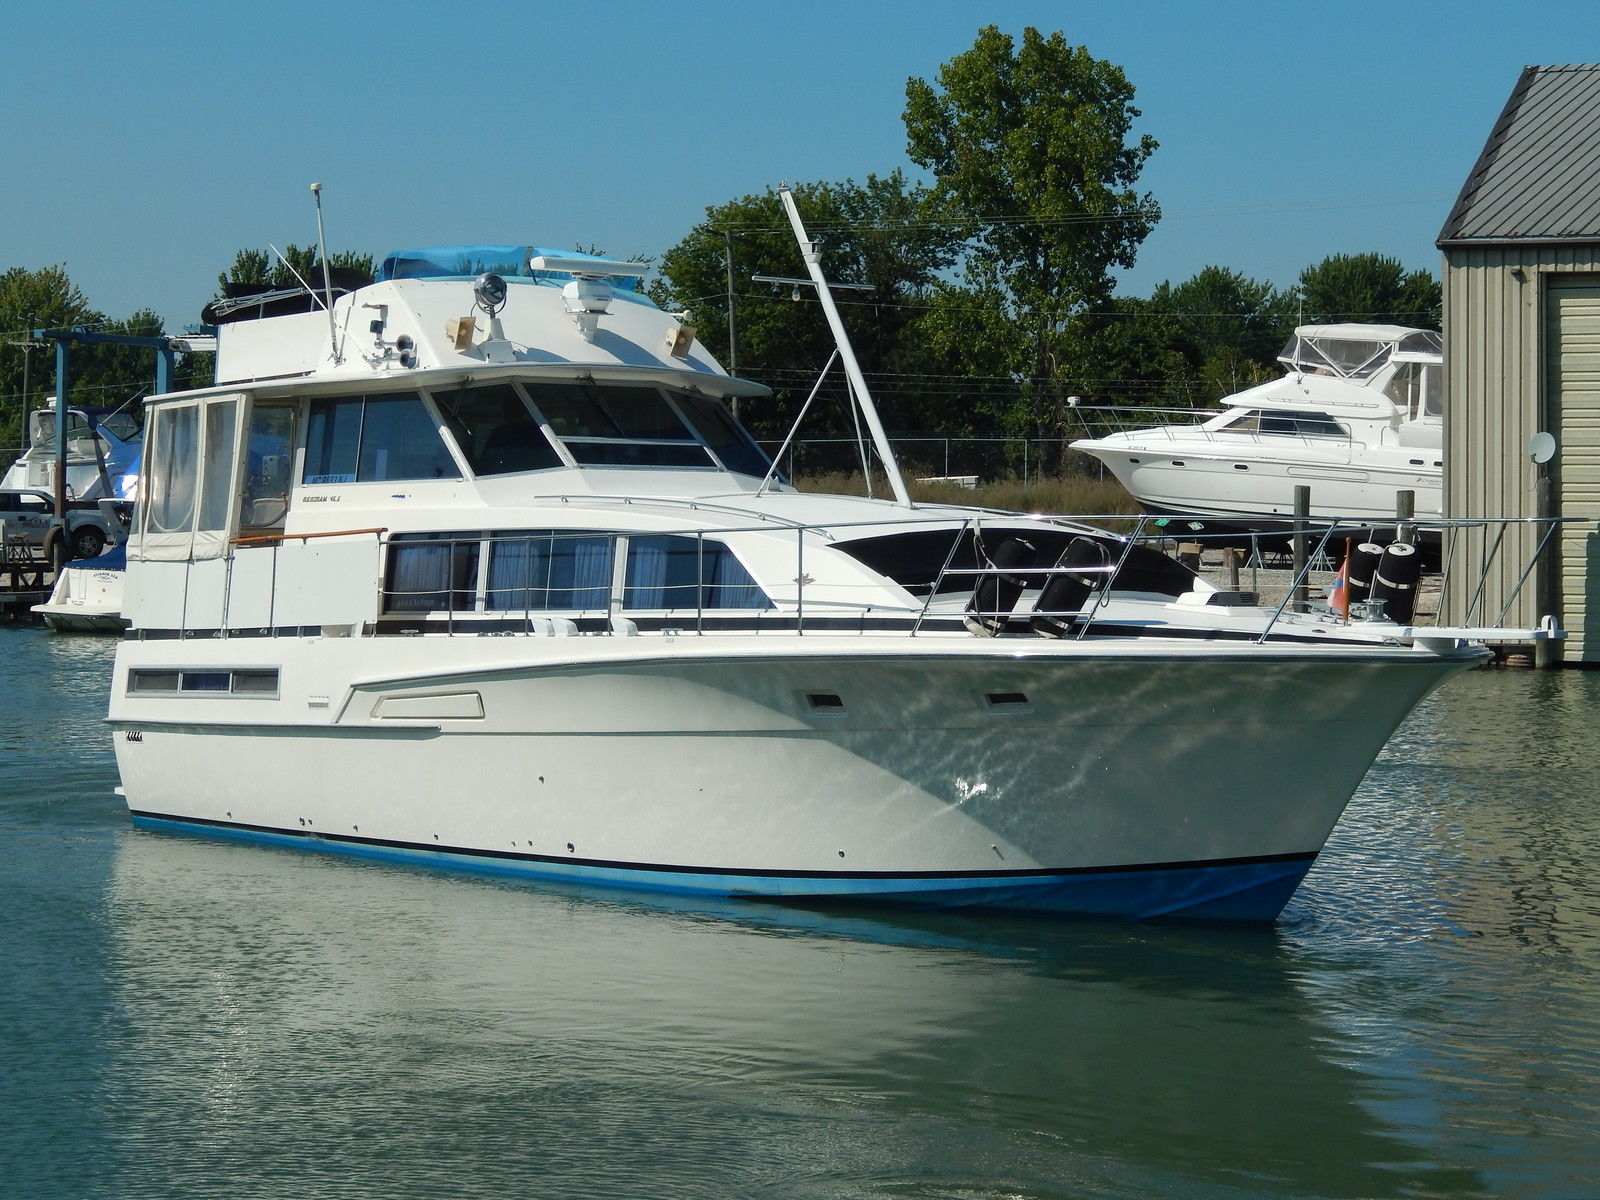 46 ft motor yachts for sale